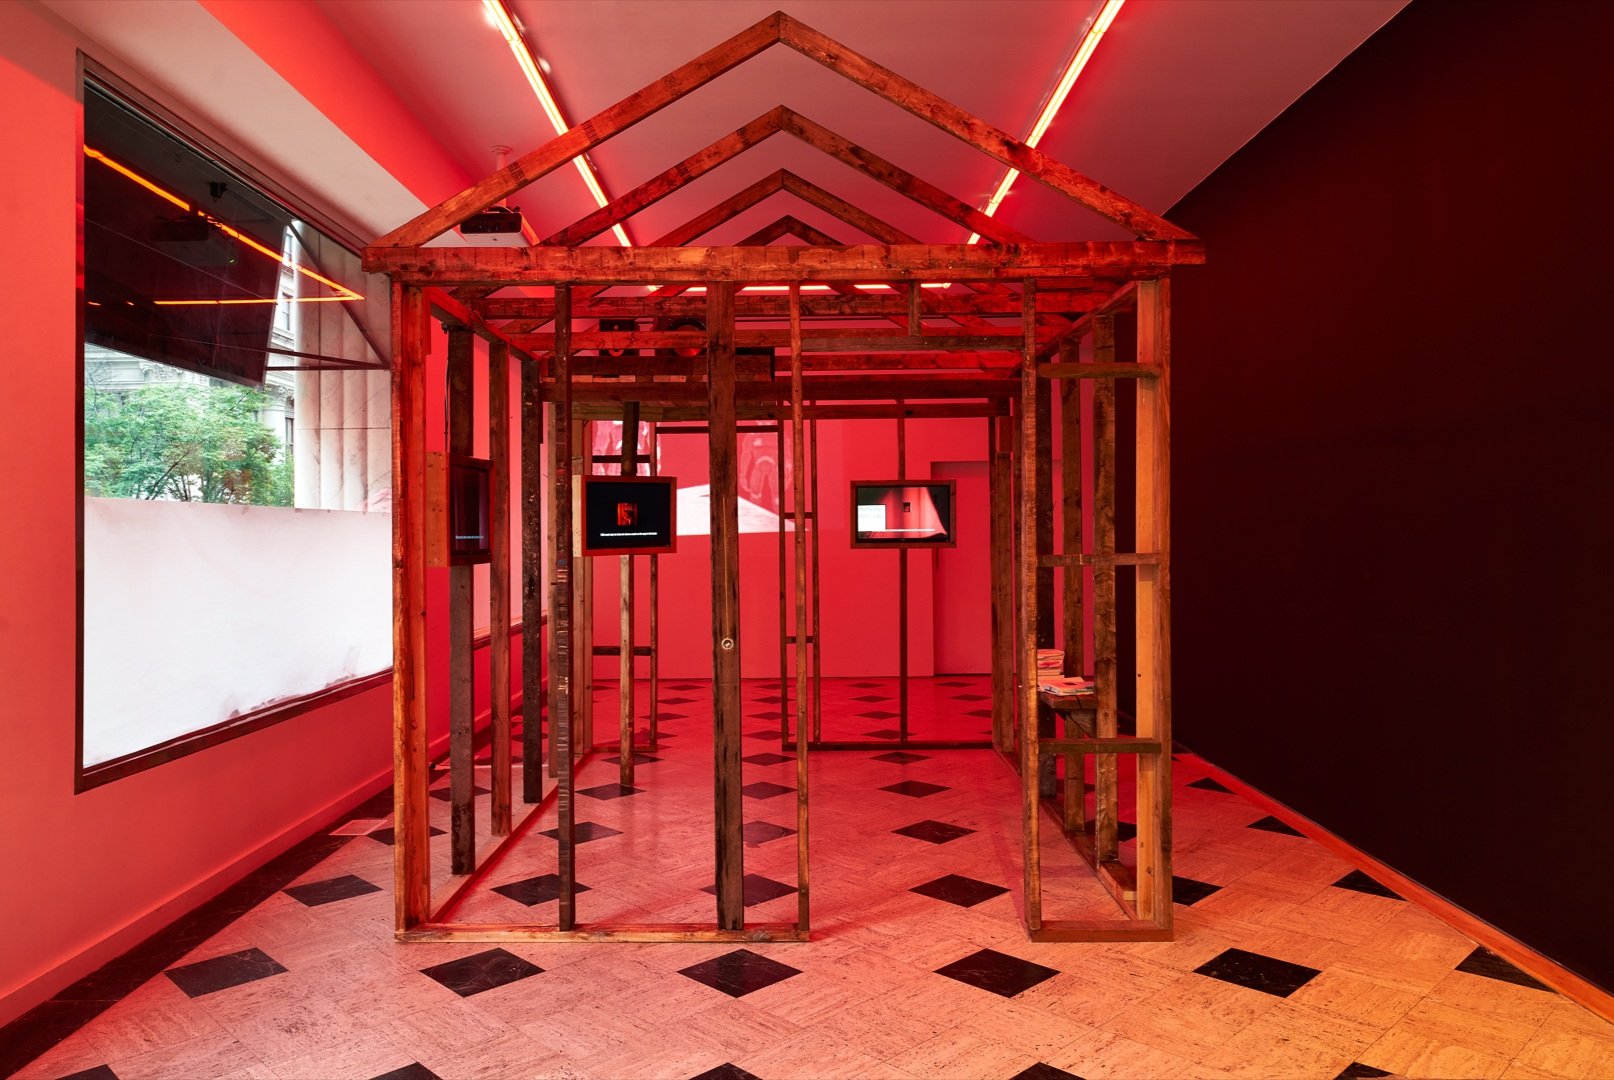 a wooden frame of a large house, in a room lit by red lights.